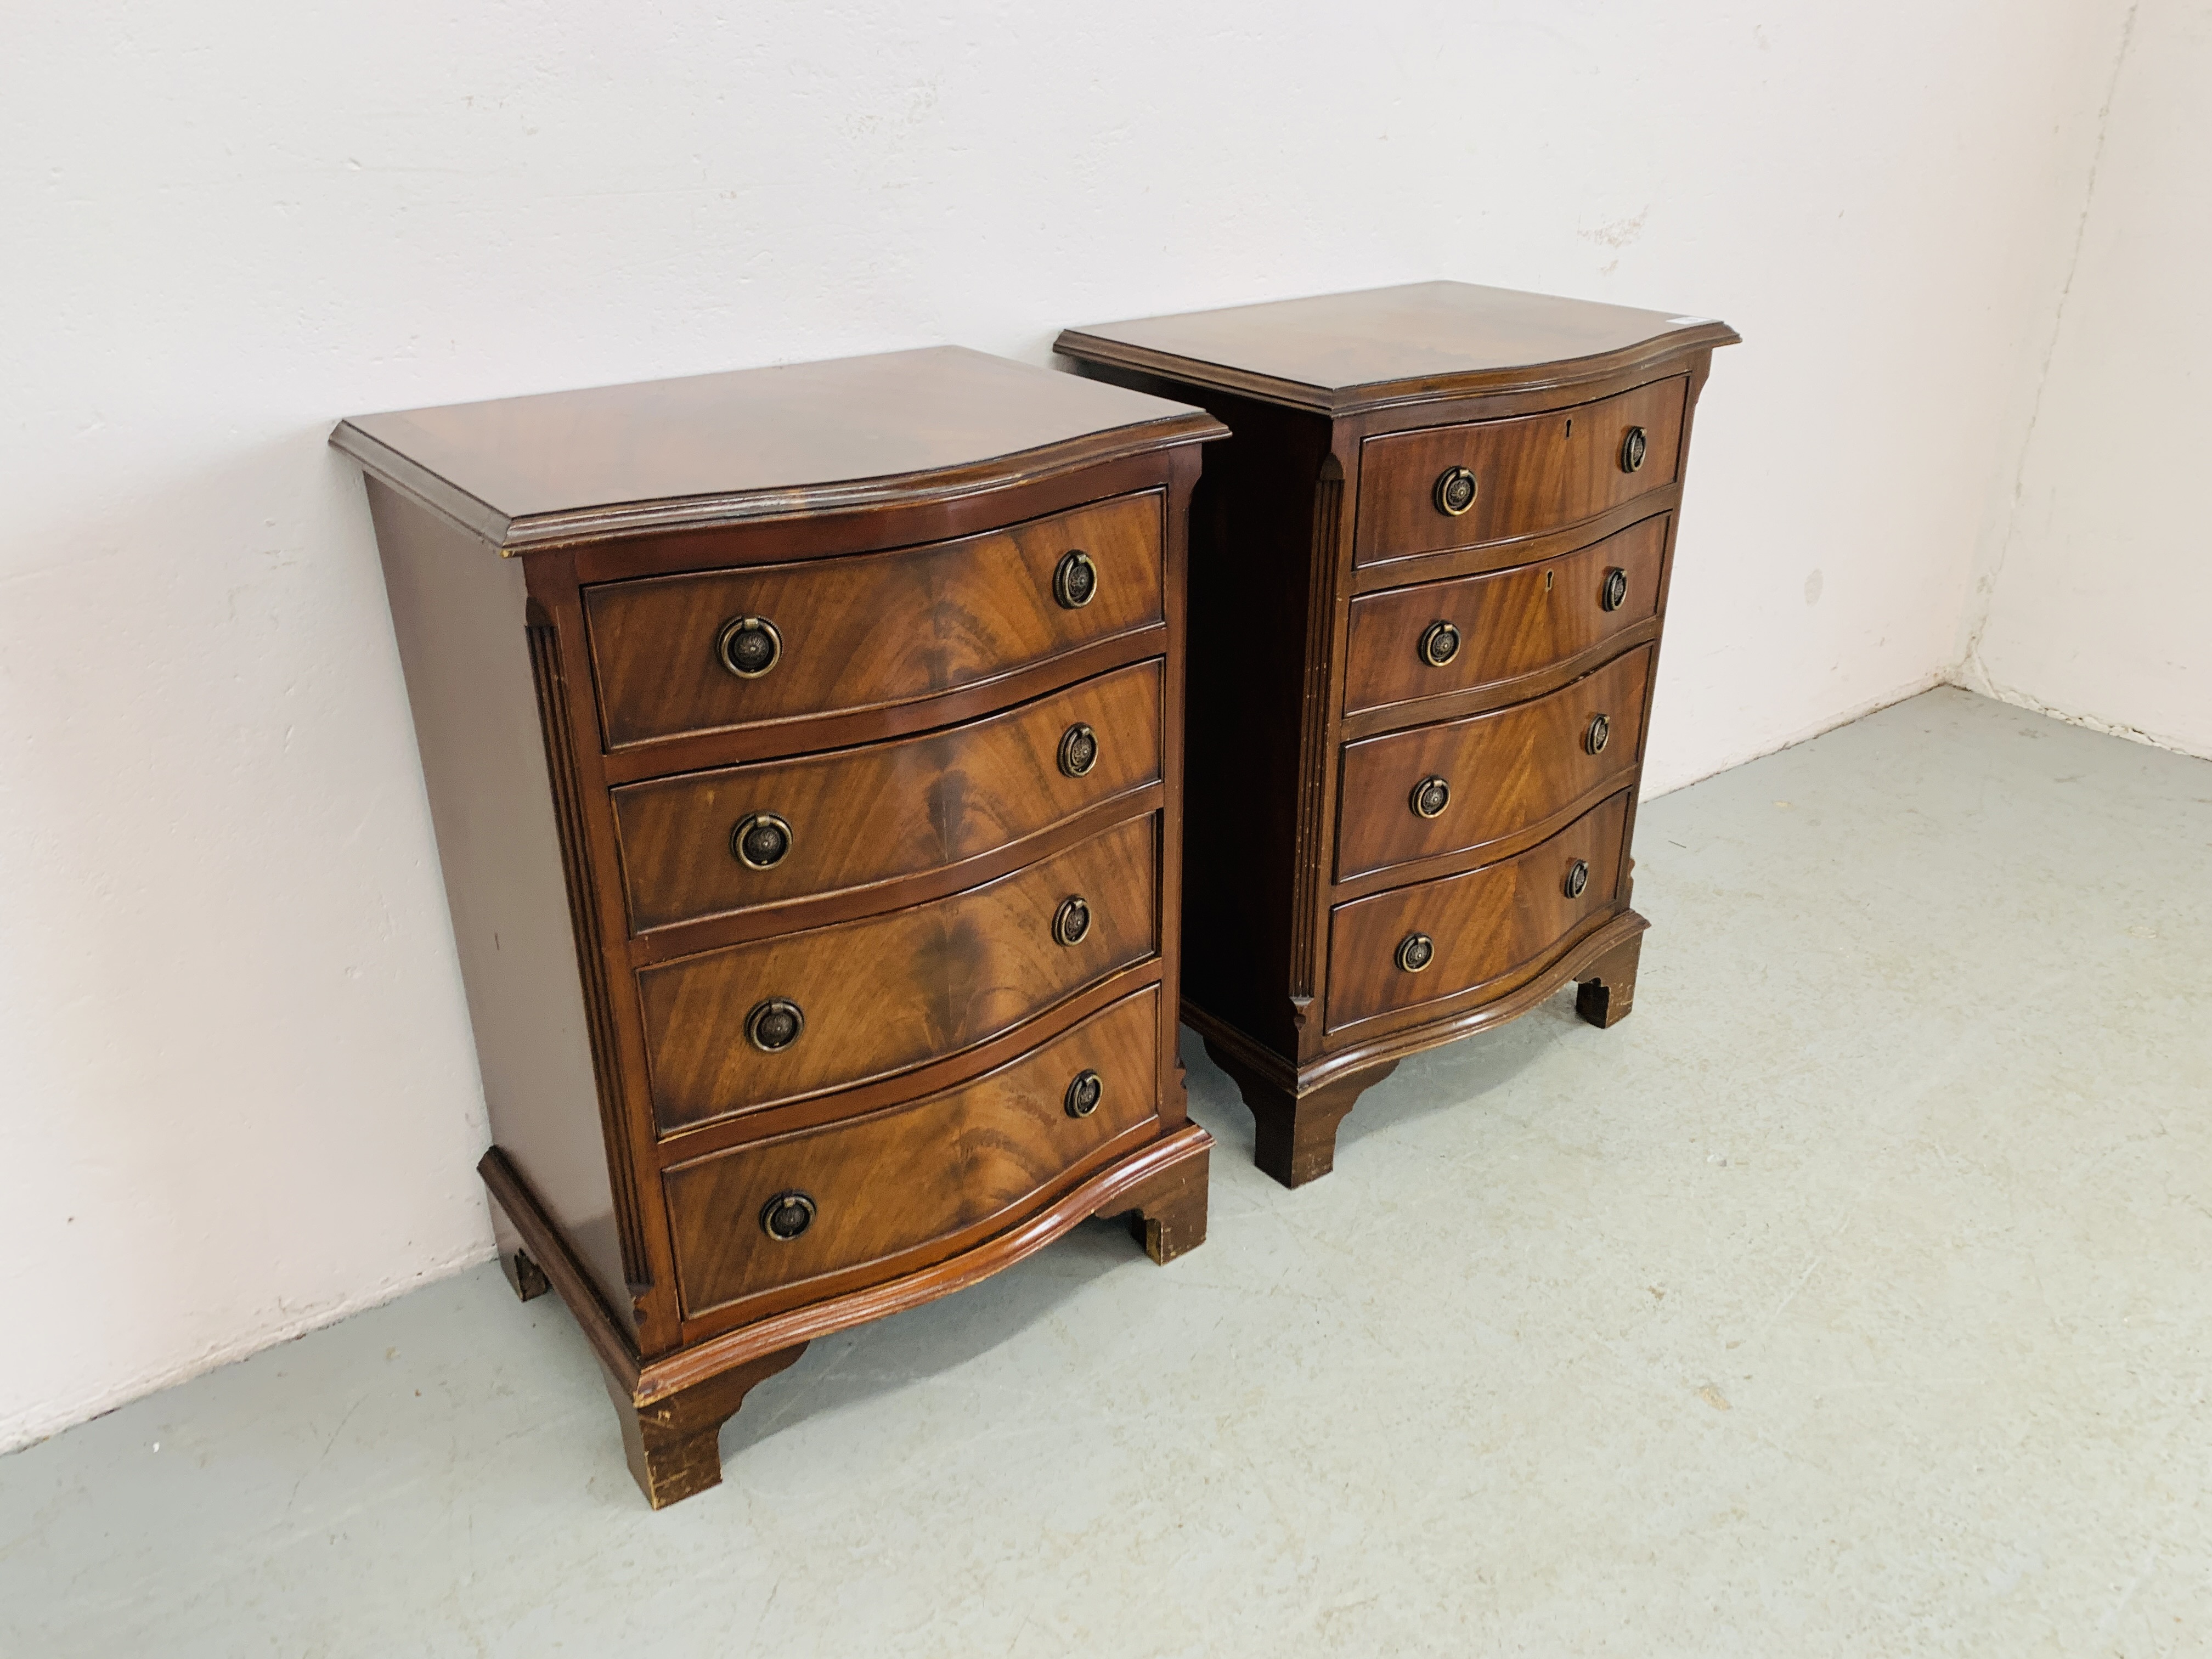 PAIR OF FLAME MAHOGANY FOUR DRAWER CHESTS - W 49CM. D 36CM. H 70CM. - Image 2 of 10